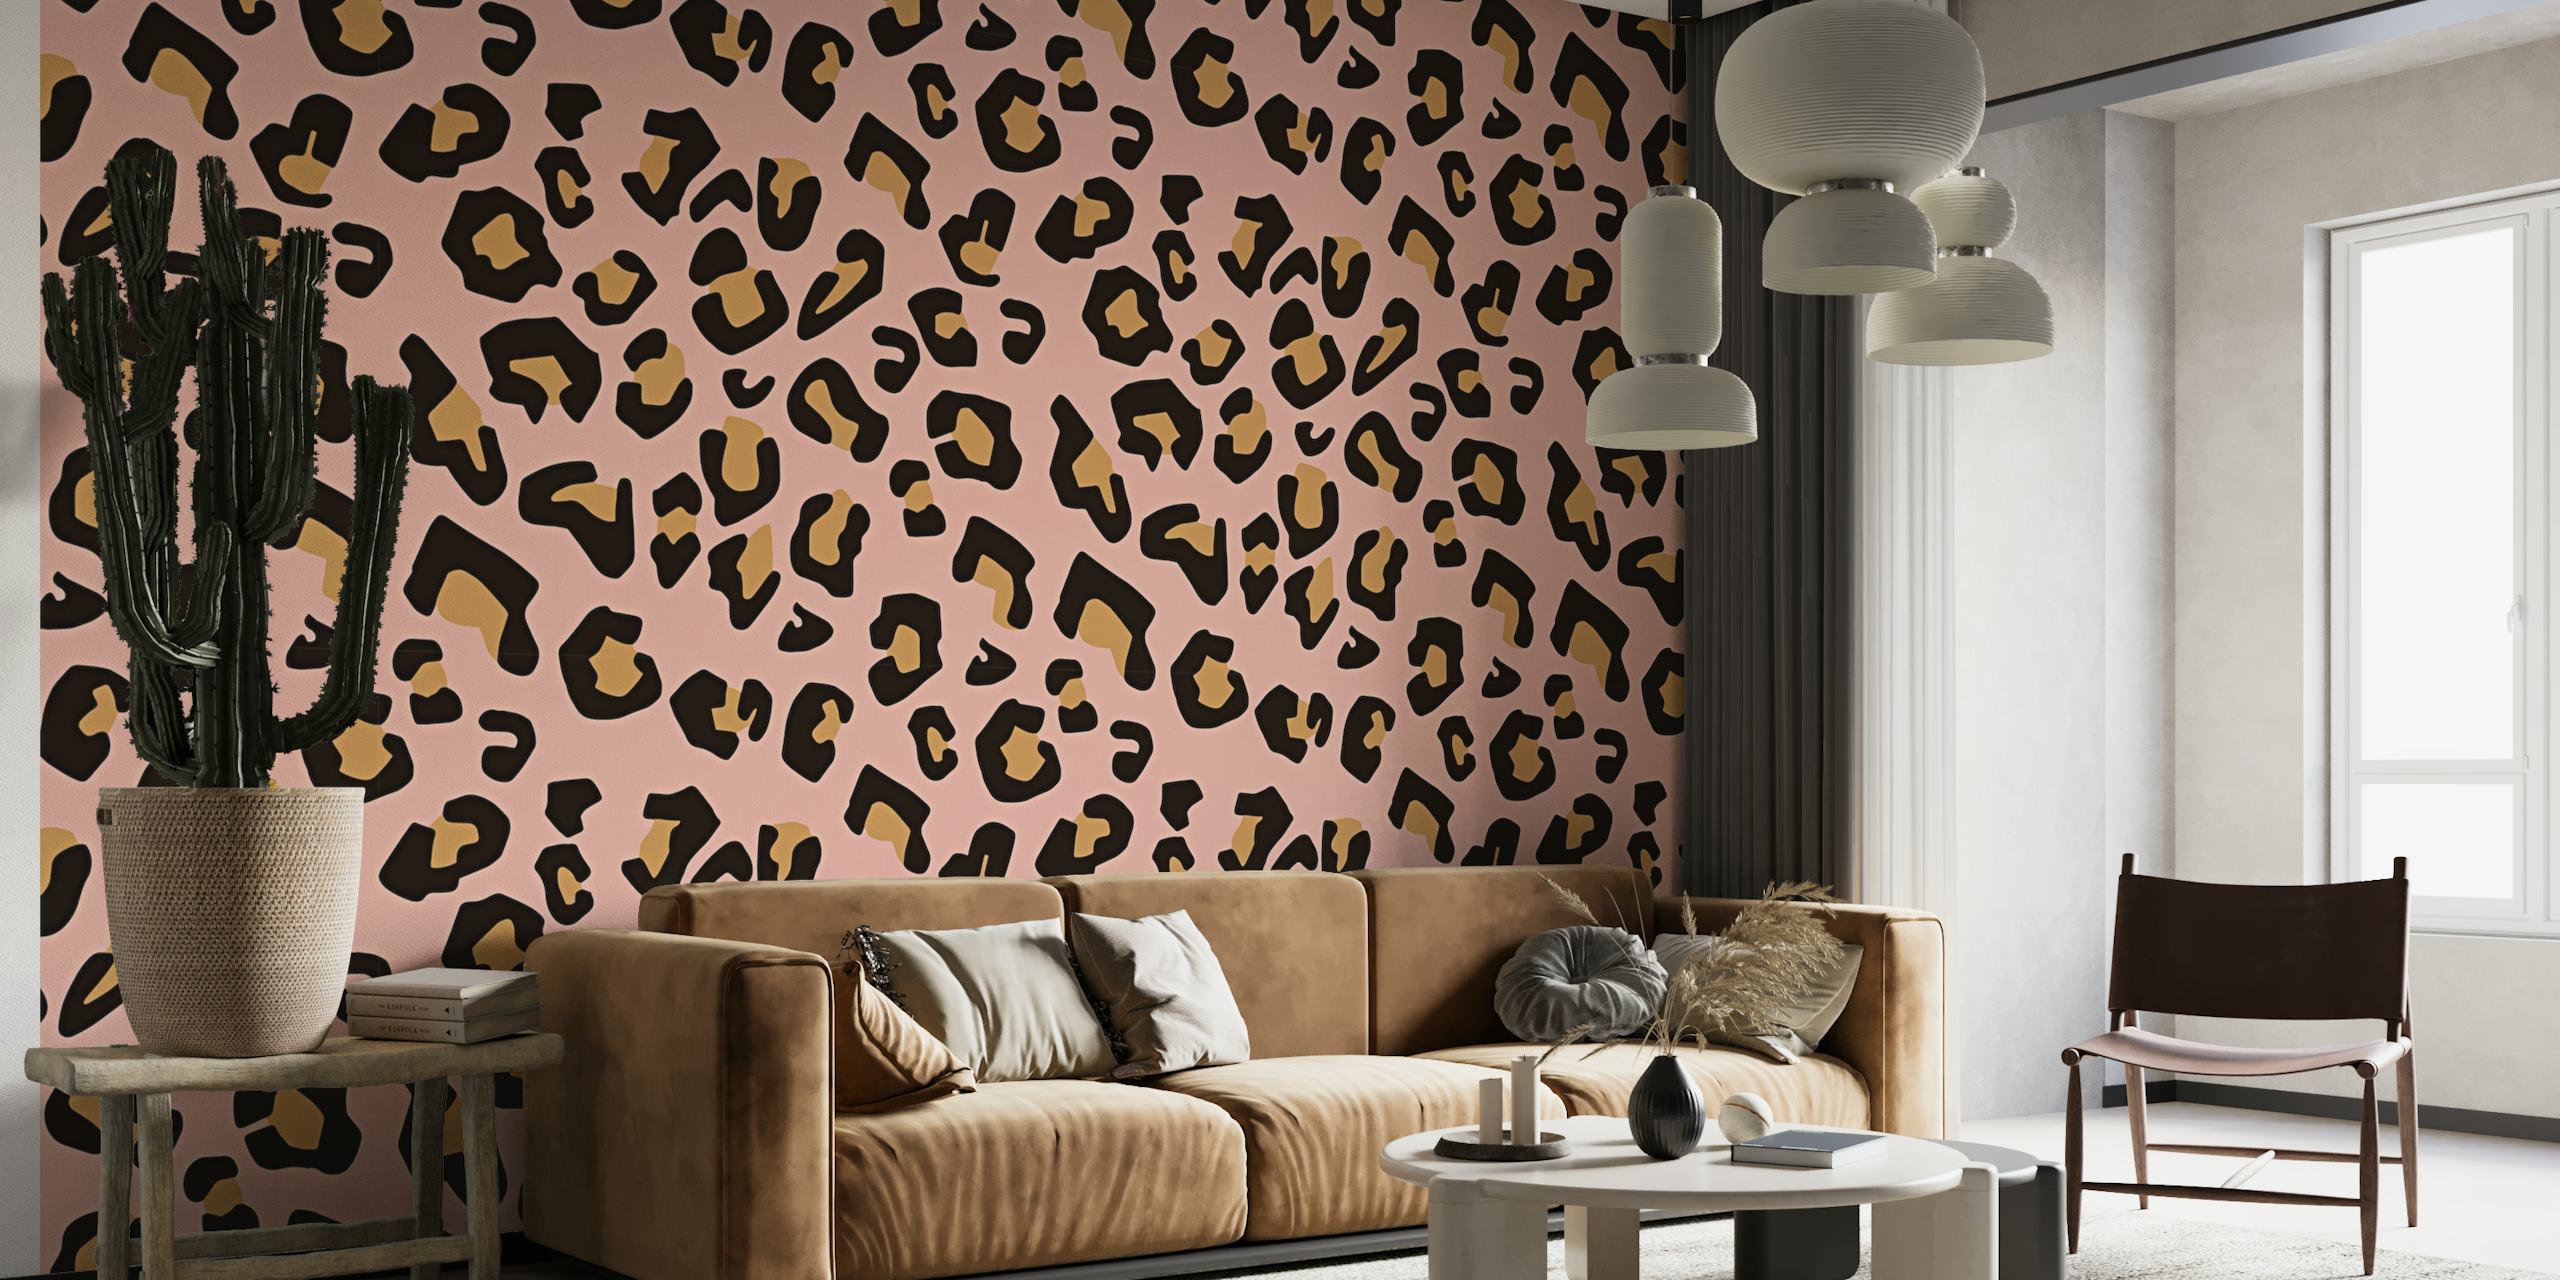 Modern leopard print pattern wall mural on a pale pink background